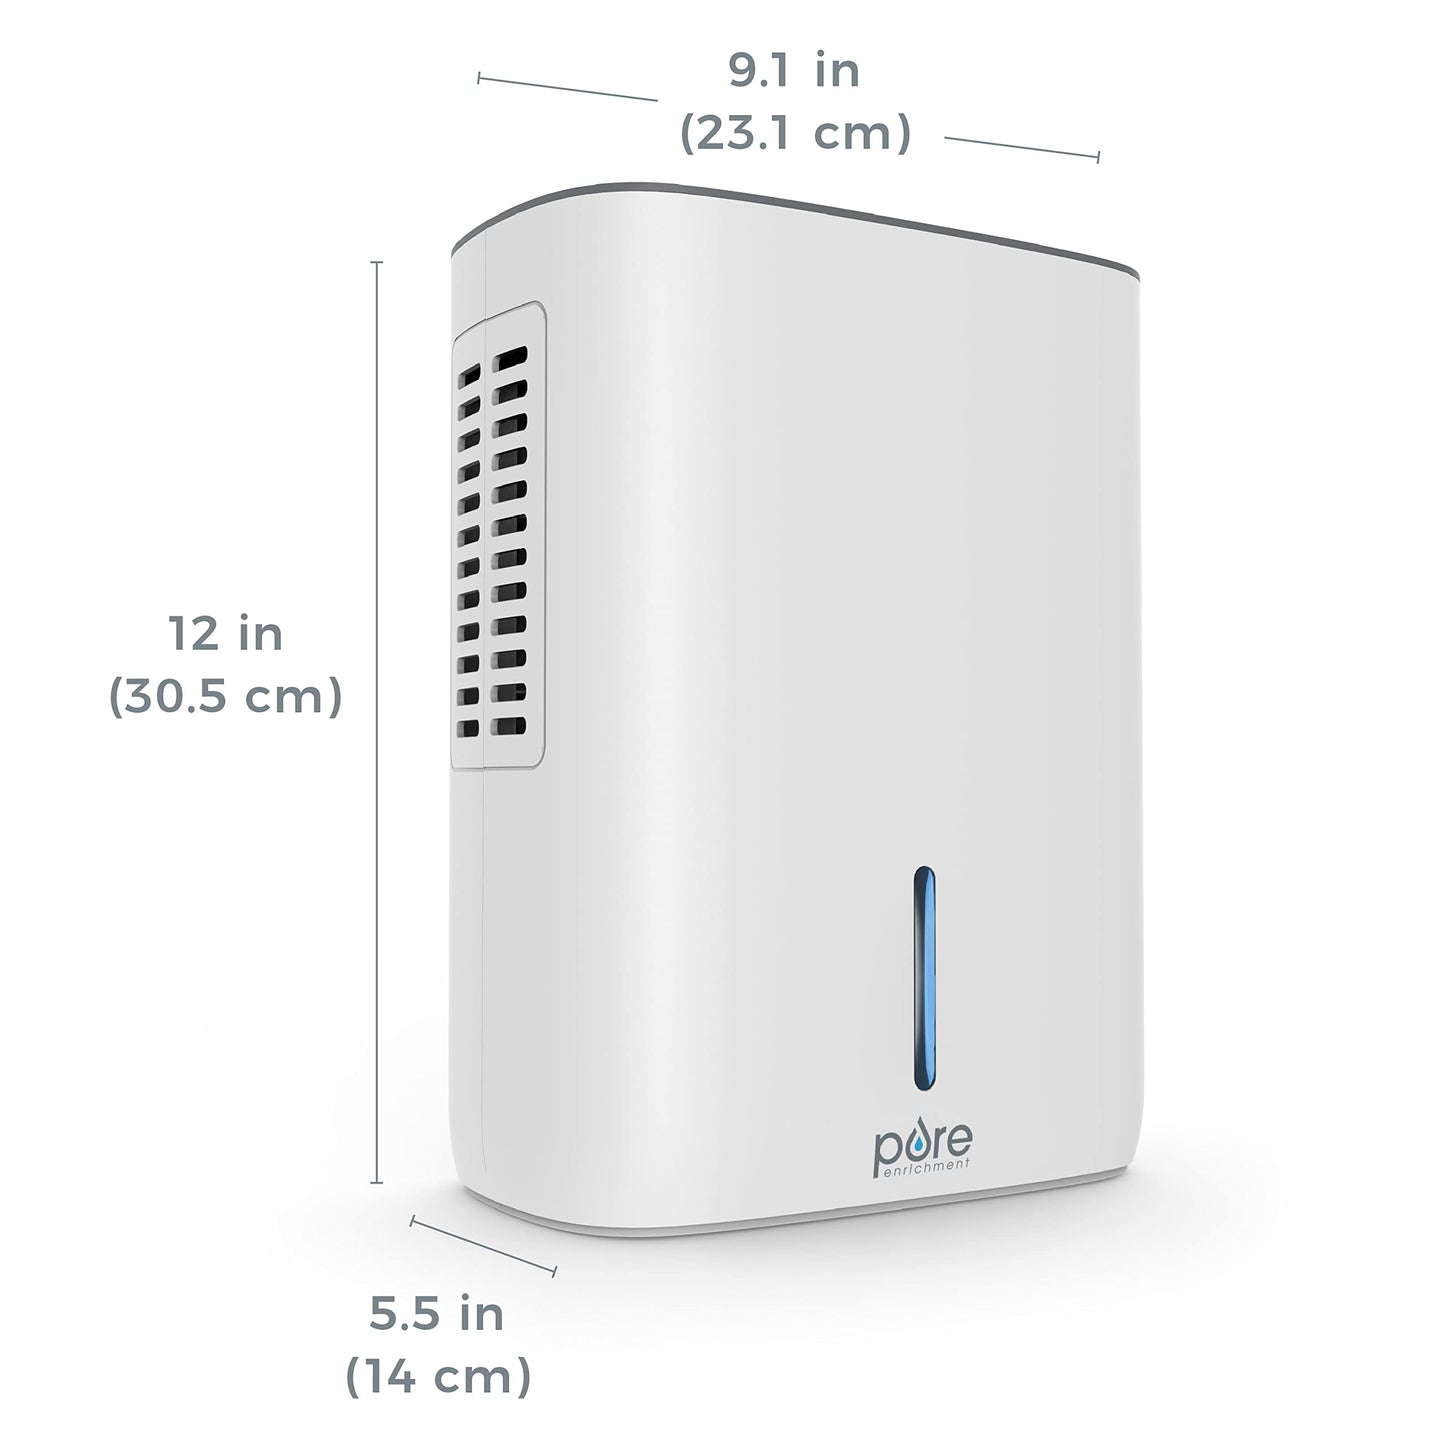 Pure Enrichment PureDry Deluxe Dehumidifier - Mid-Sized 1.5L Water Tank Eliminates 500ml/day in Excess Moisture from Closets, Bathrooms, Basements, Boats, Kitchens and Other Small to Mid-Sized Areas